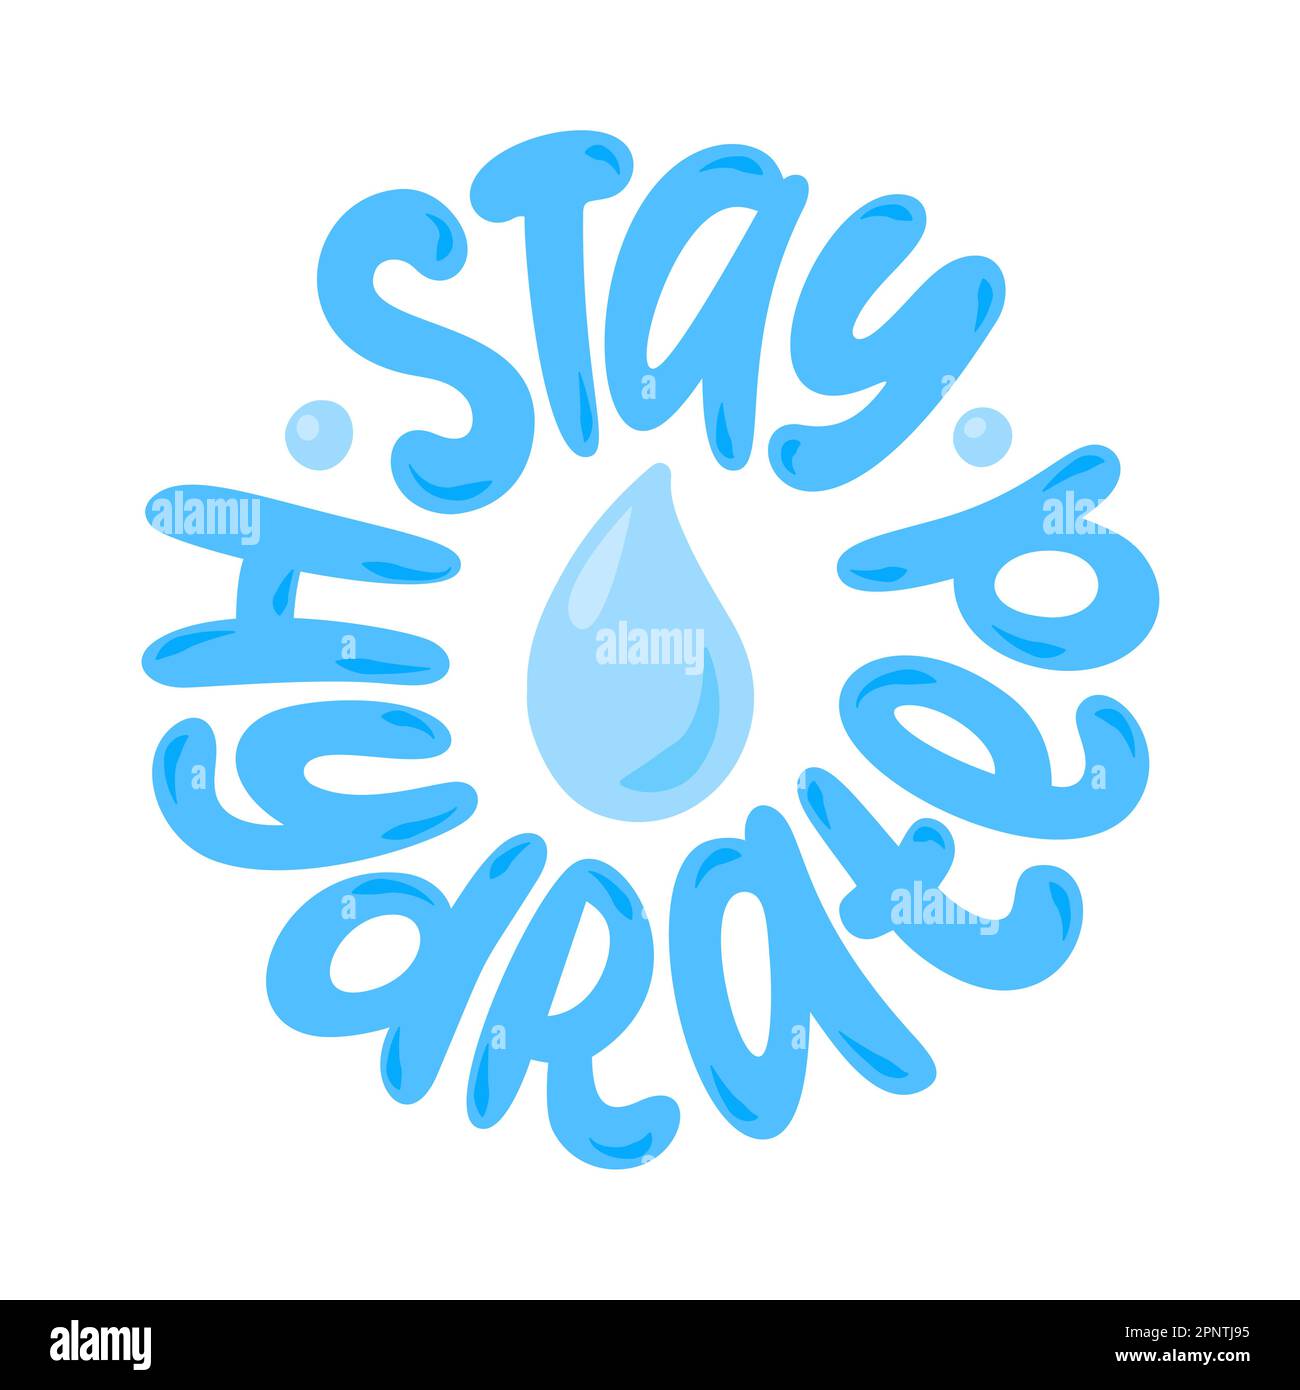 https://c8.alamy.com/comp/2PNTJ95/stay-hydrated-logo-stamp-quote-self-care-word-modern-design-text-stay-hydrated-hydrate-yourself-design-print-for-t-shirt-pin-label-badges-stick-2PNTJ95.jpg